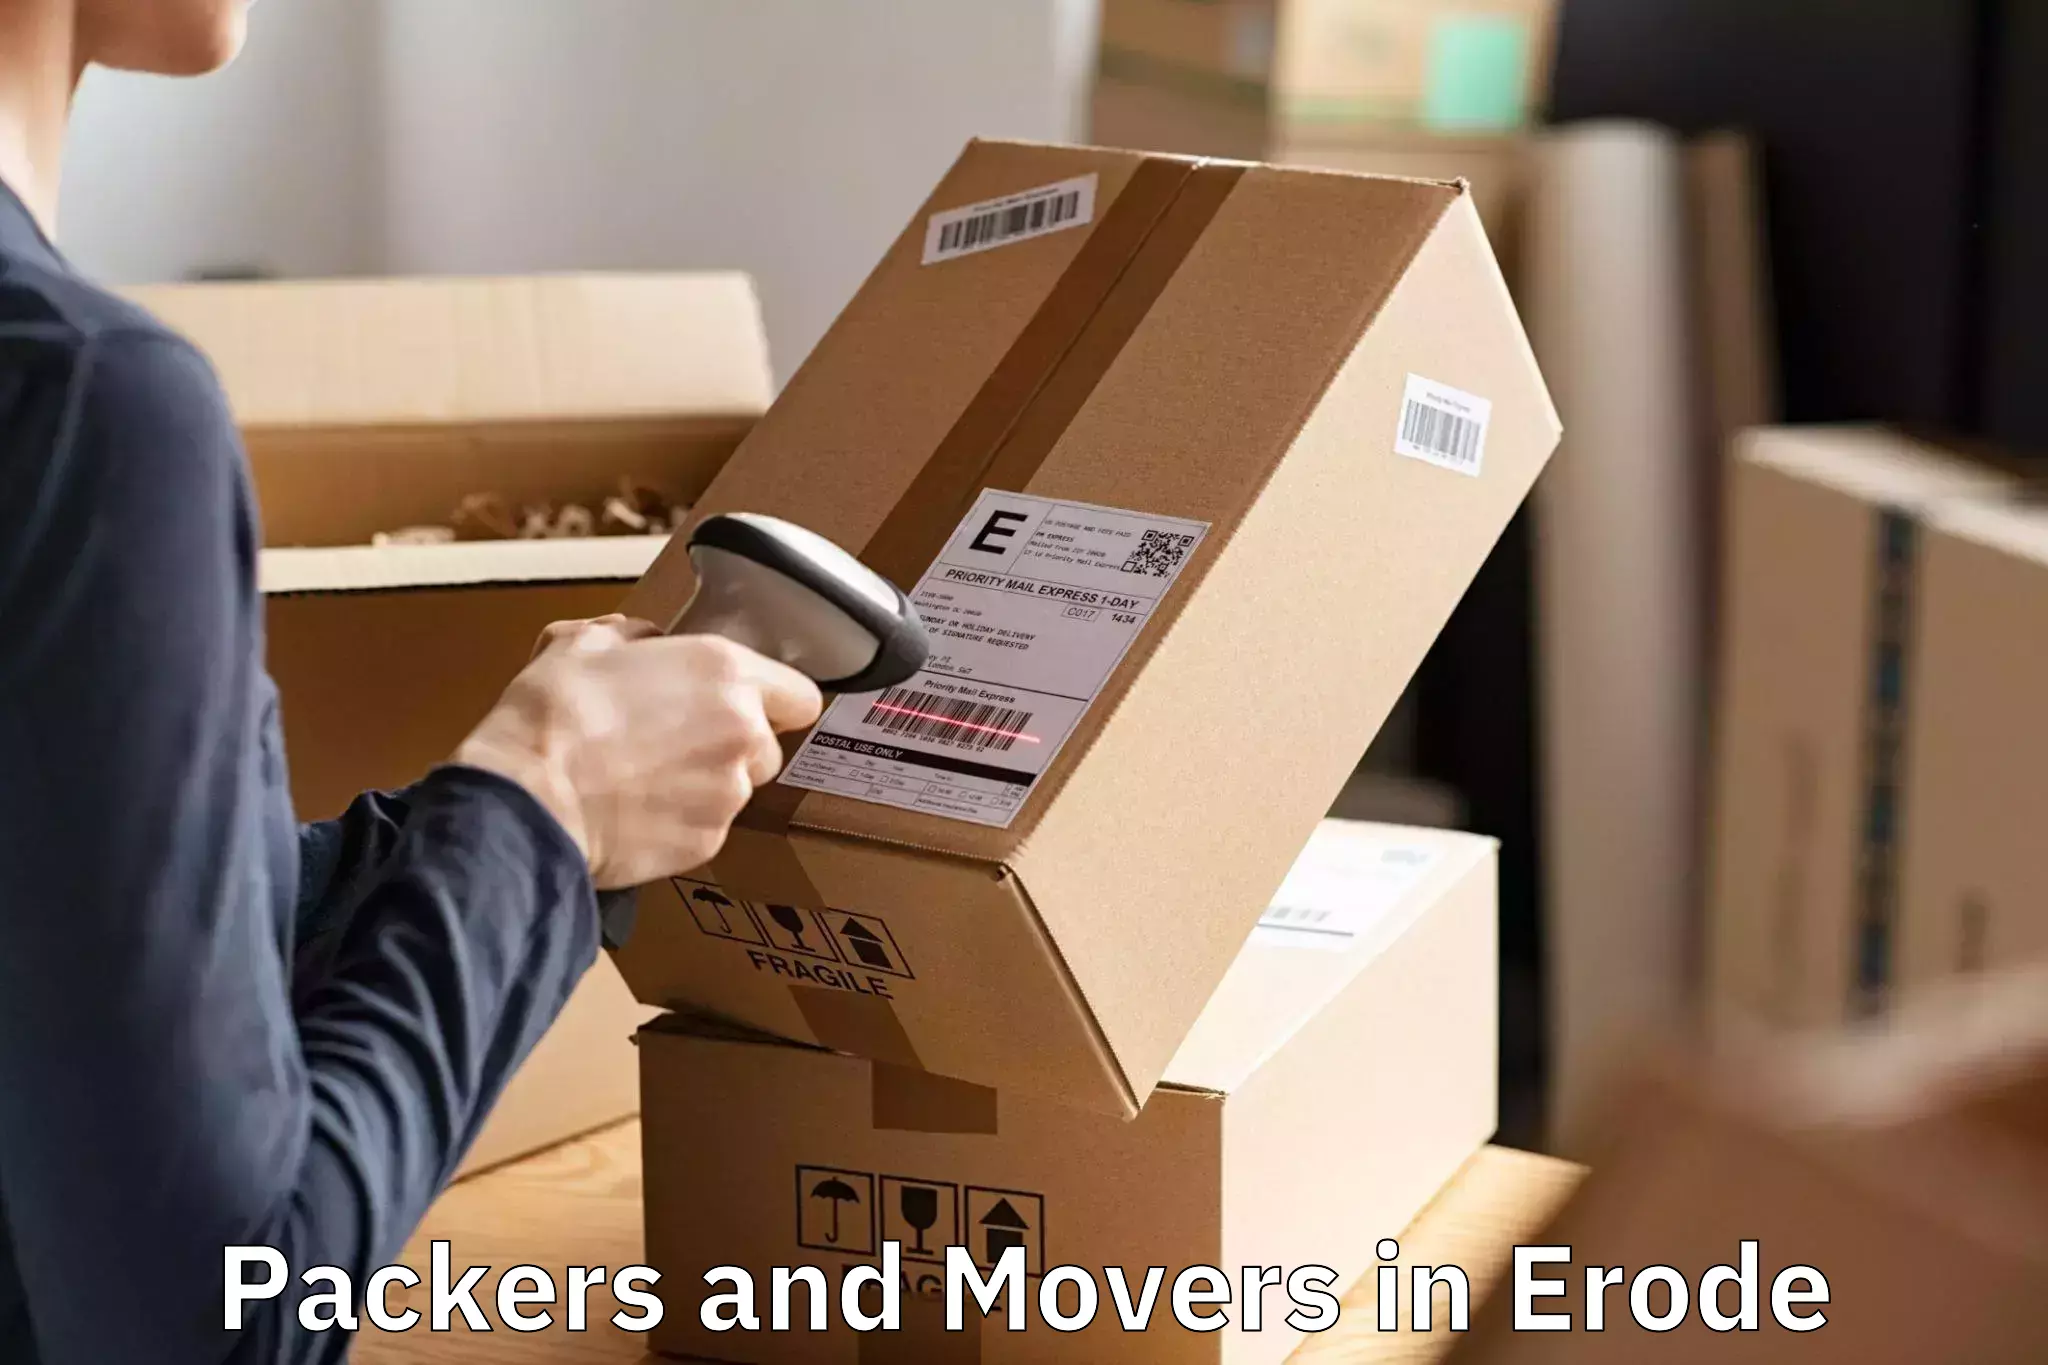 Efficient Packers And Movers in Erode, Tamil Nadu (TN)